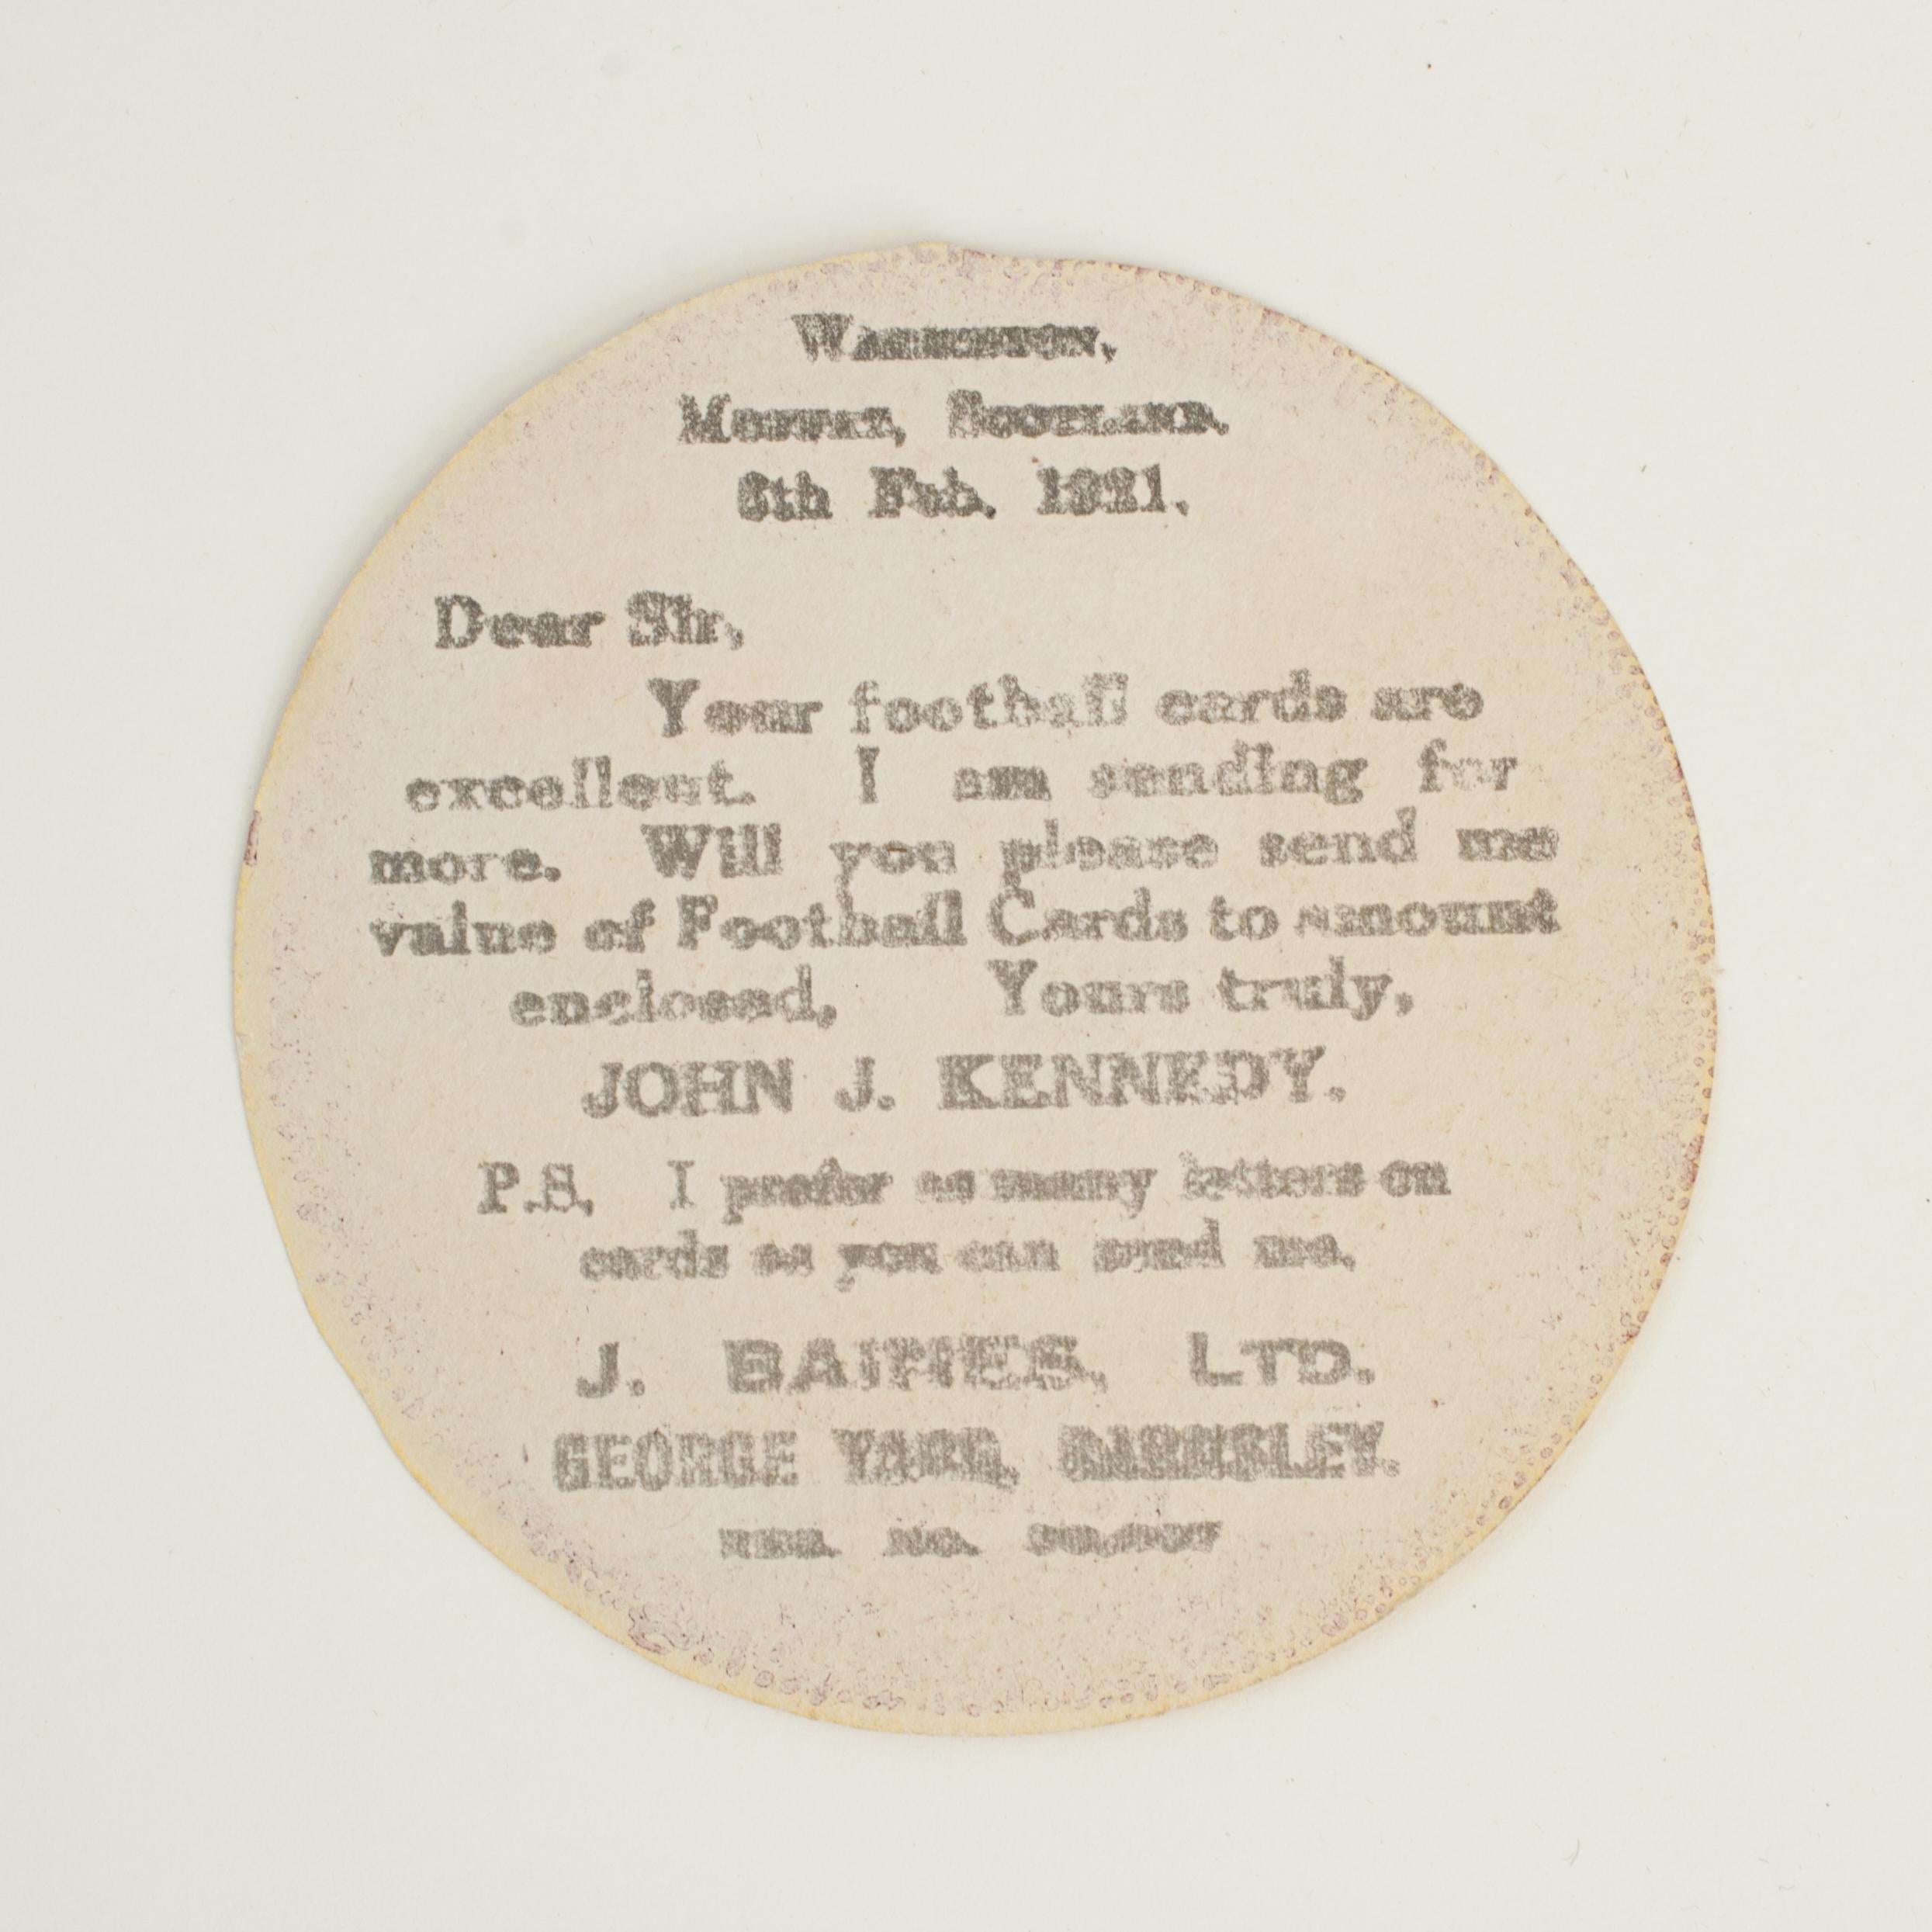 Baines football trade card, Newcastle, Well Centred.
A rare circular football trade card in the shape of a leather football ball. Made by the toy shop owner from Bradford, John Baines. Baines went on to produce not only football cards but